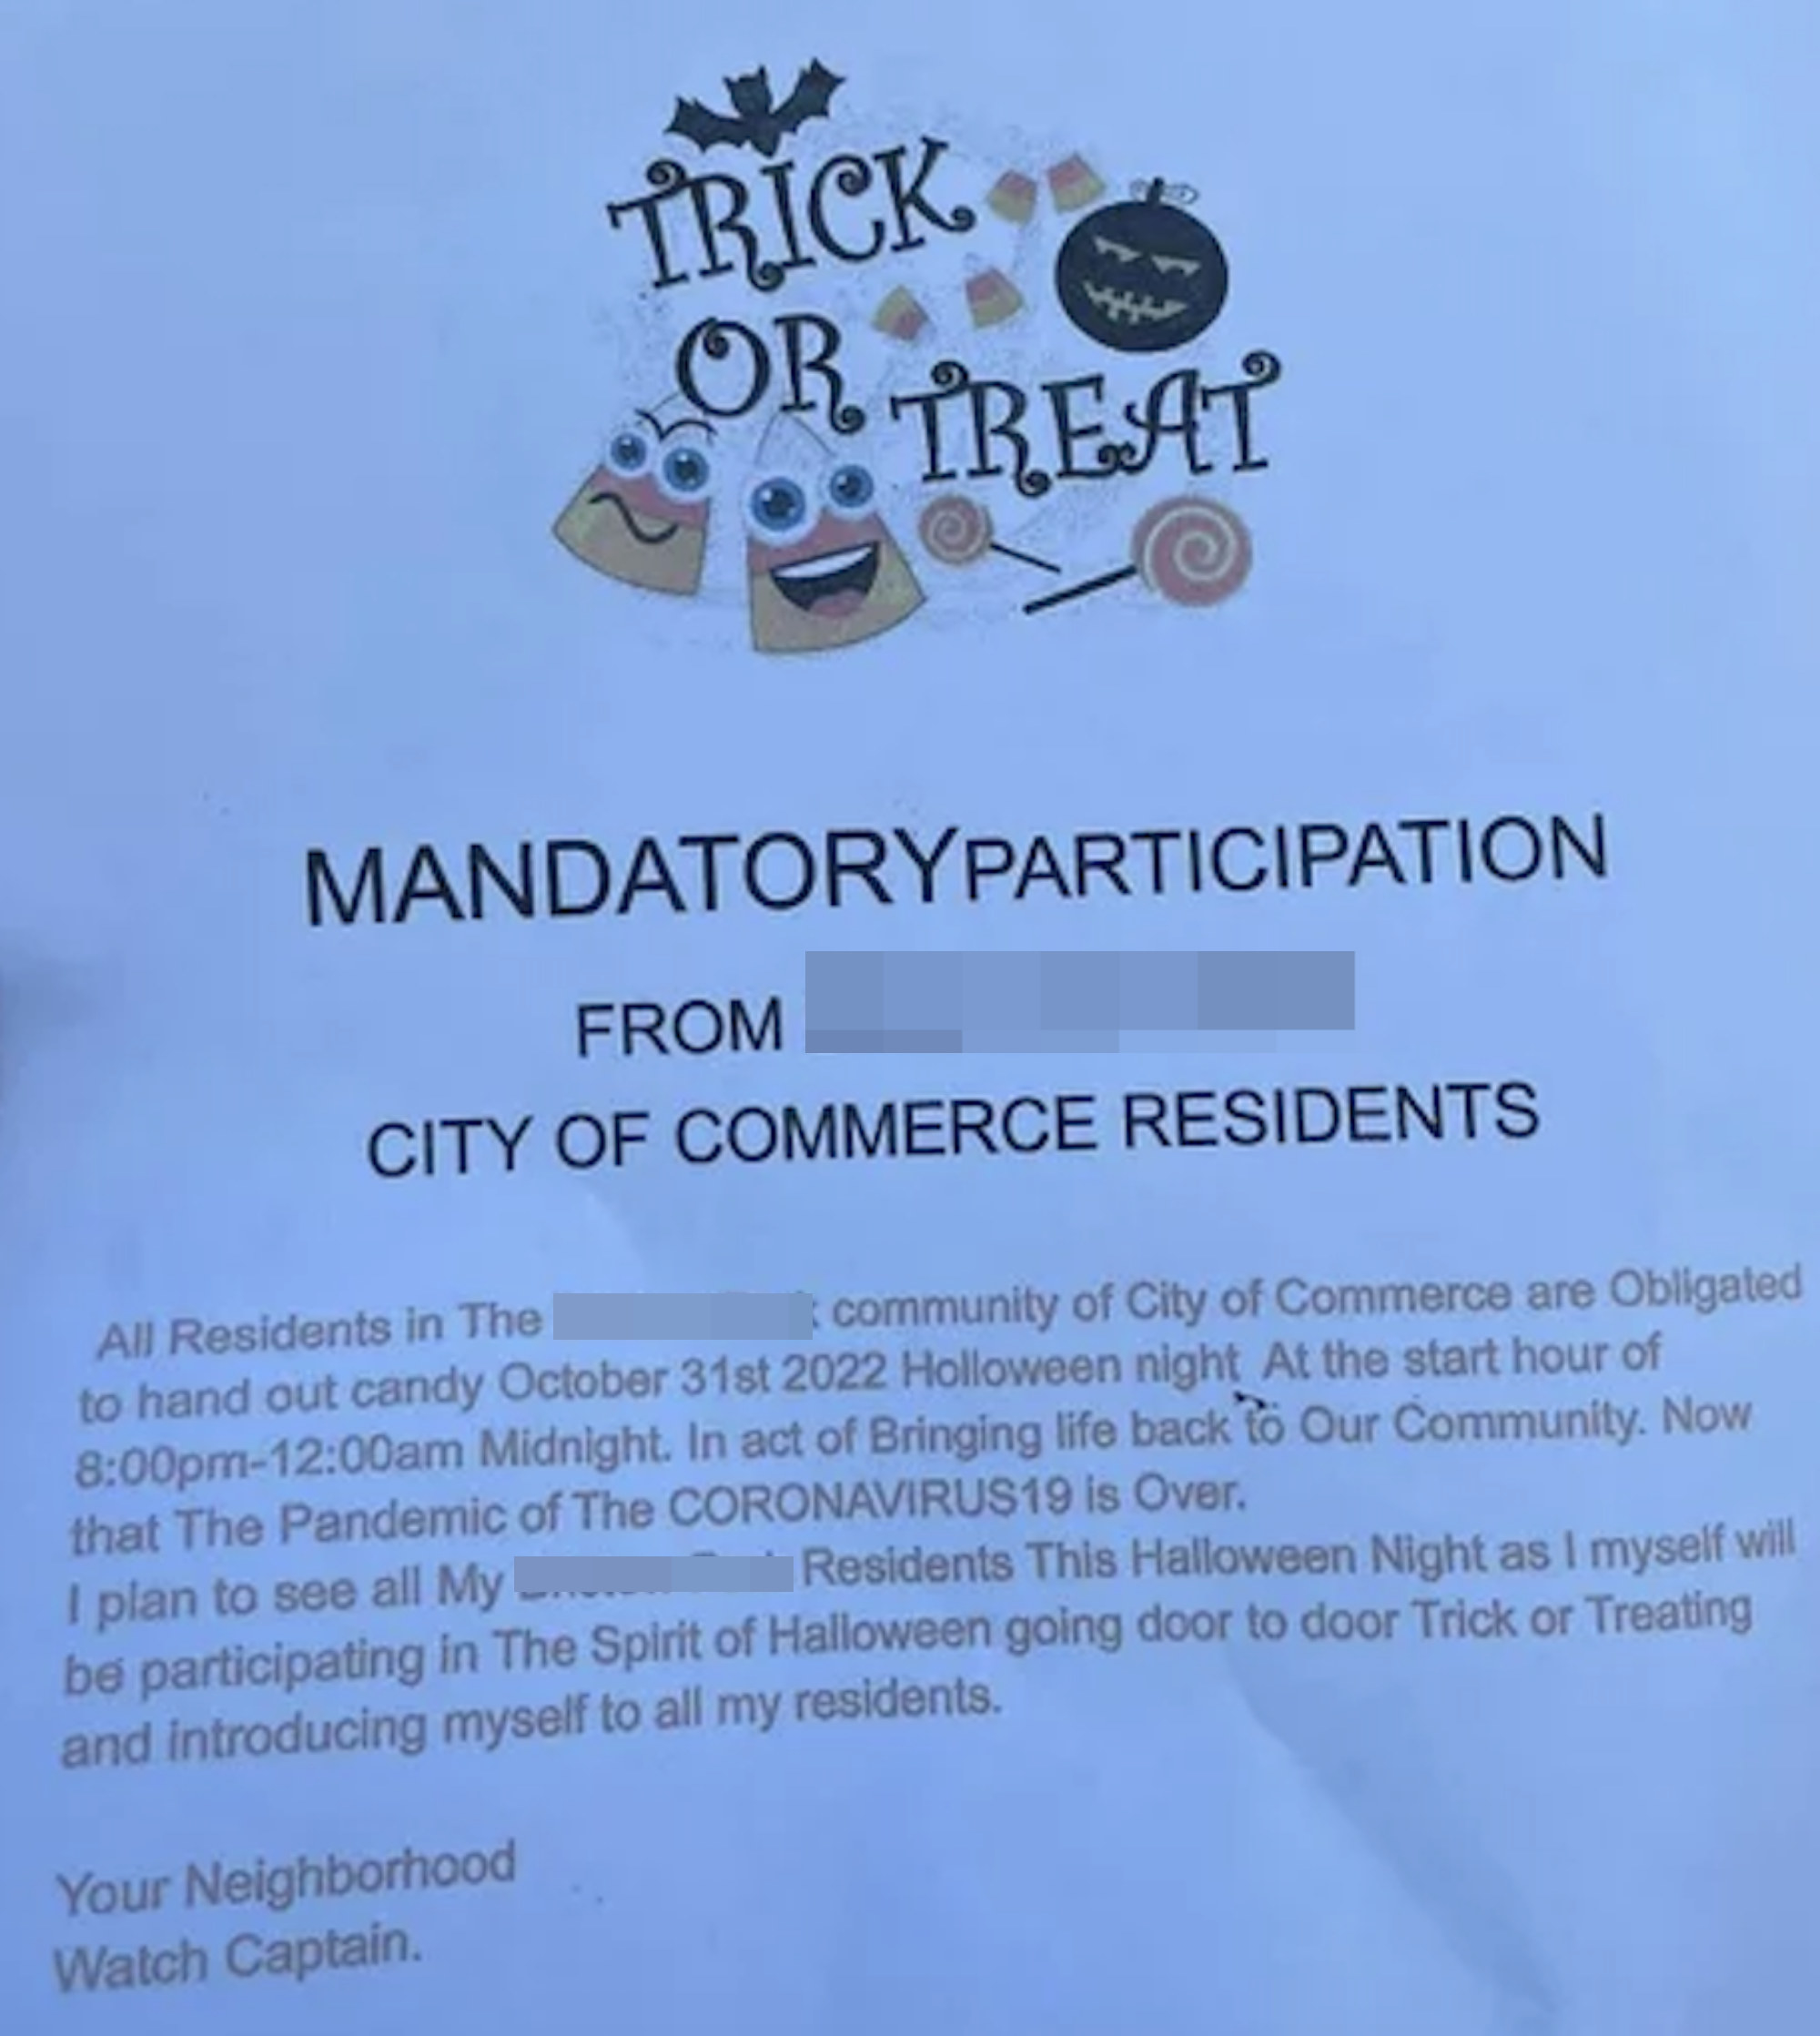 A note from a neighbor asking to make it obligatory to hand out candy for all residents